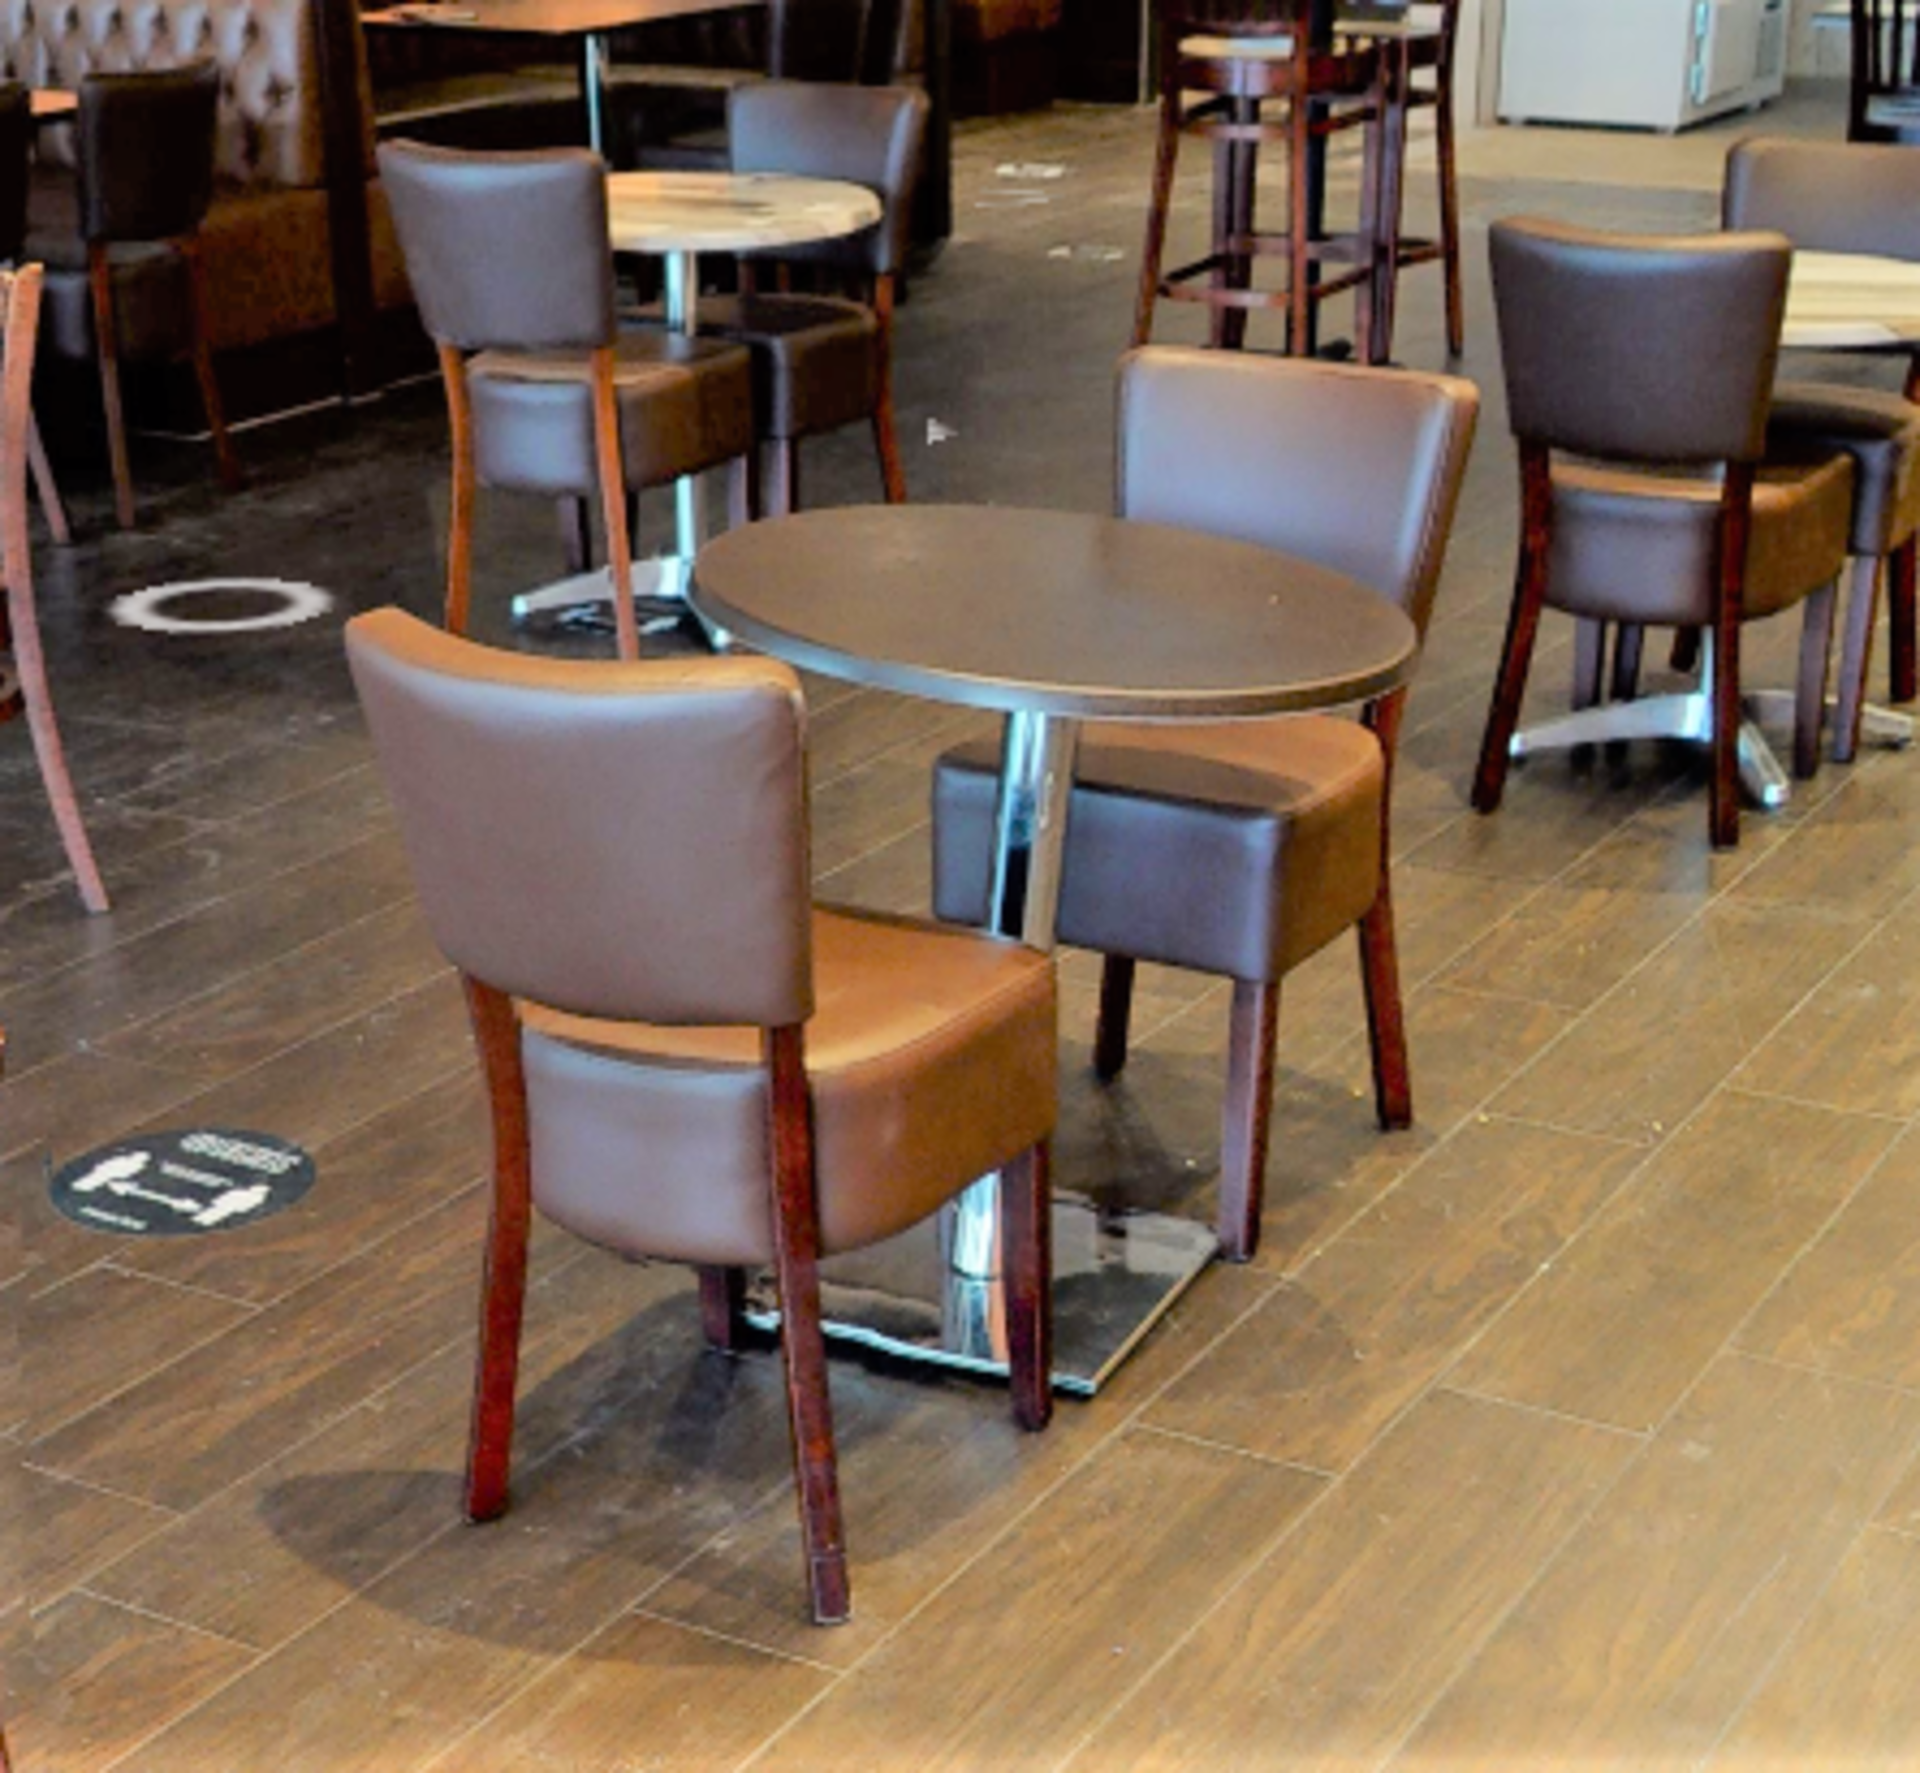 6 x Restaurant Chairs With Brown Leather Seat Pads and Padded Backrests - CL701 - Location: Ashton - Image 4 of 9